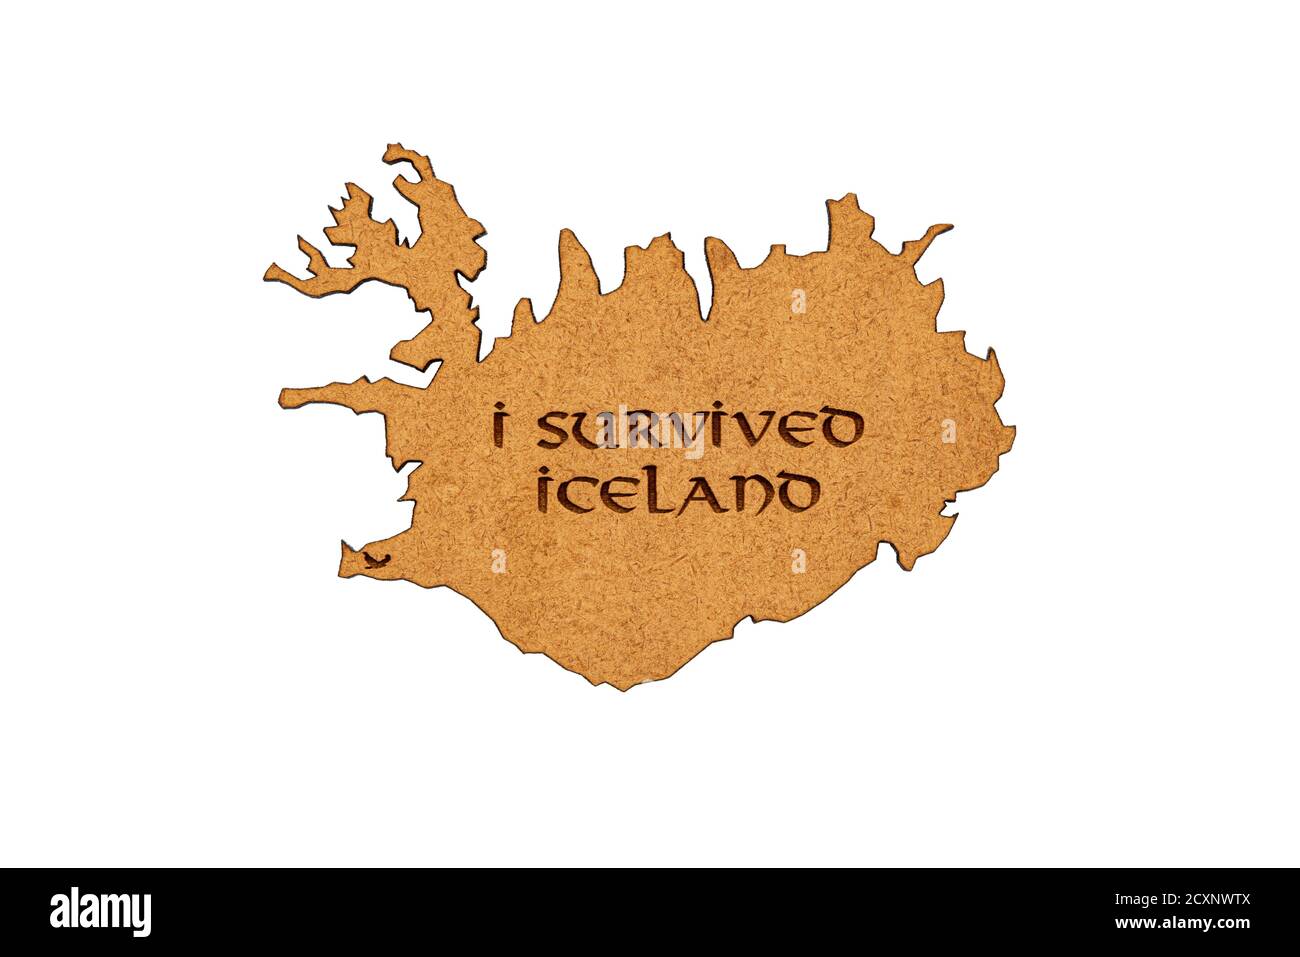 Map of Iceland on wood texture with the engraved inscription 'I survived iceland', isolated on a white background. Stock Photo